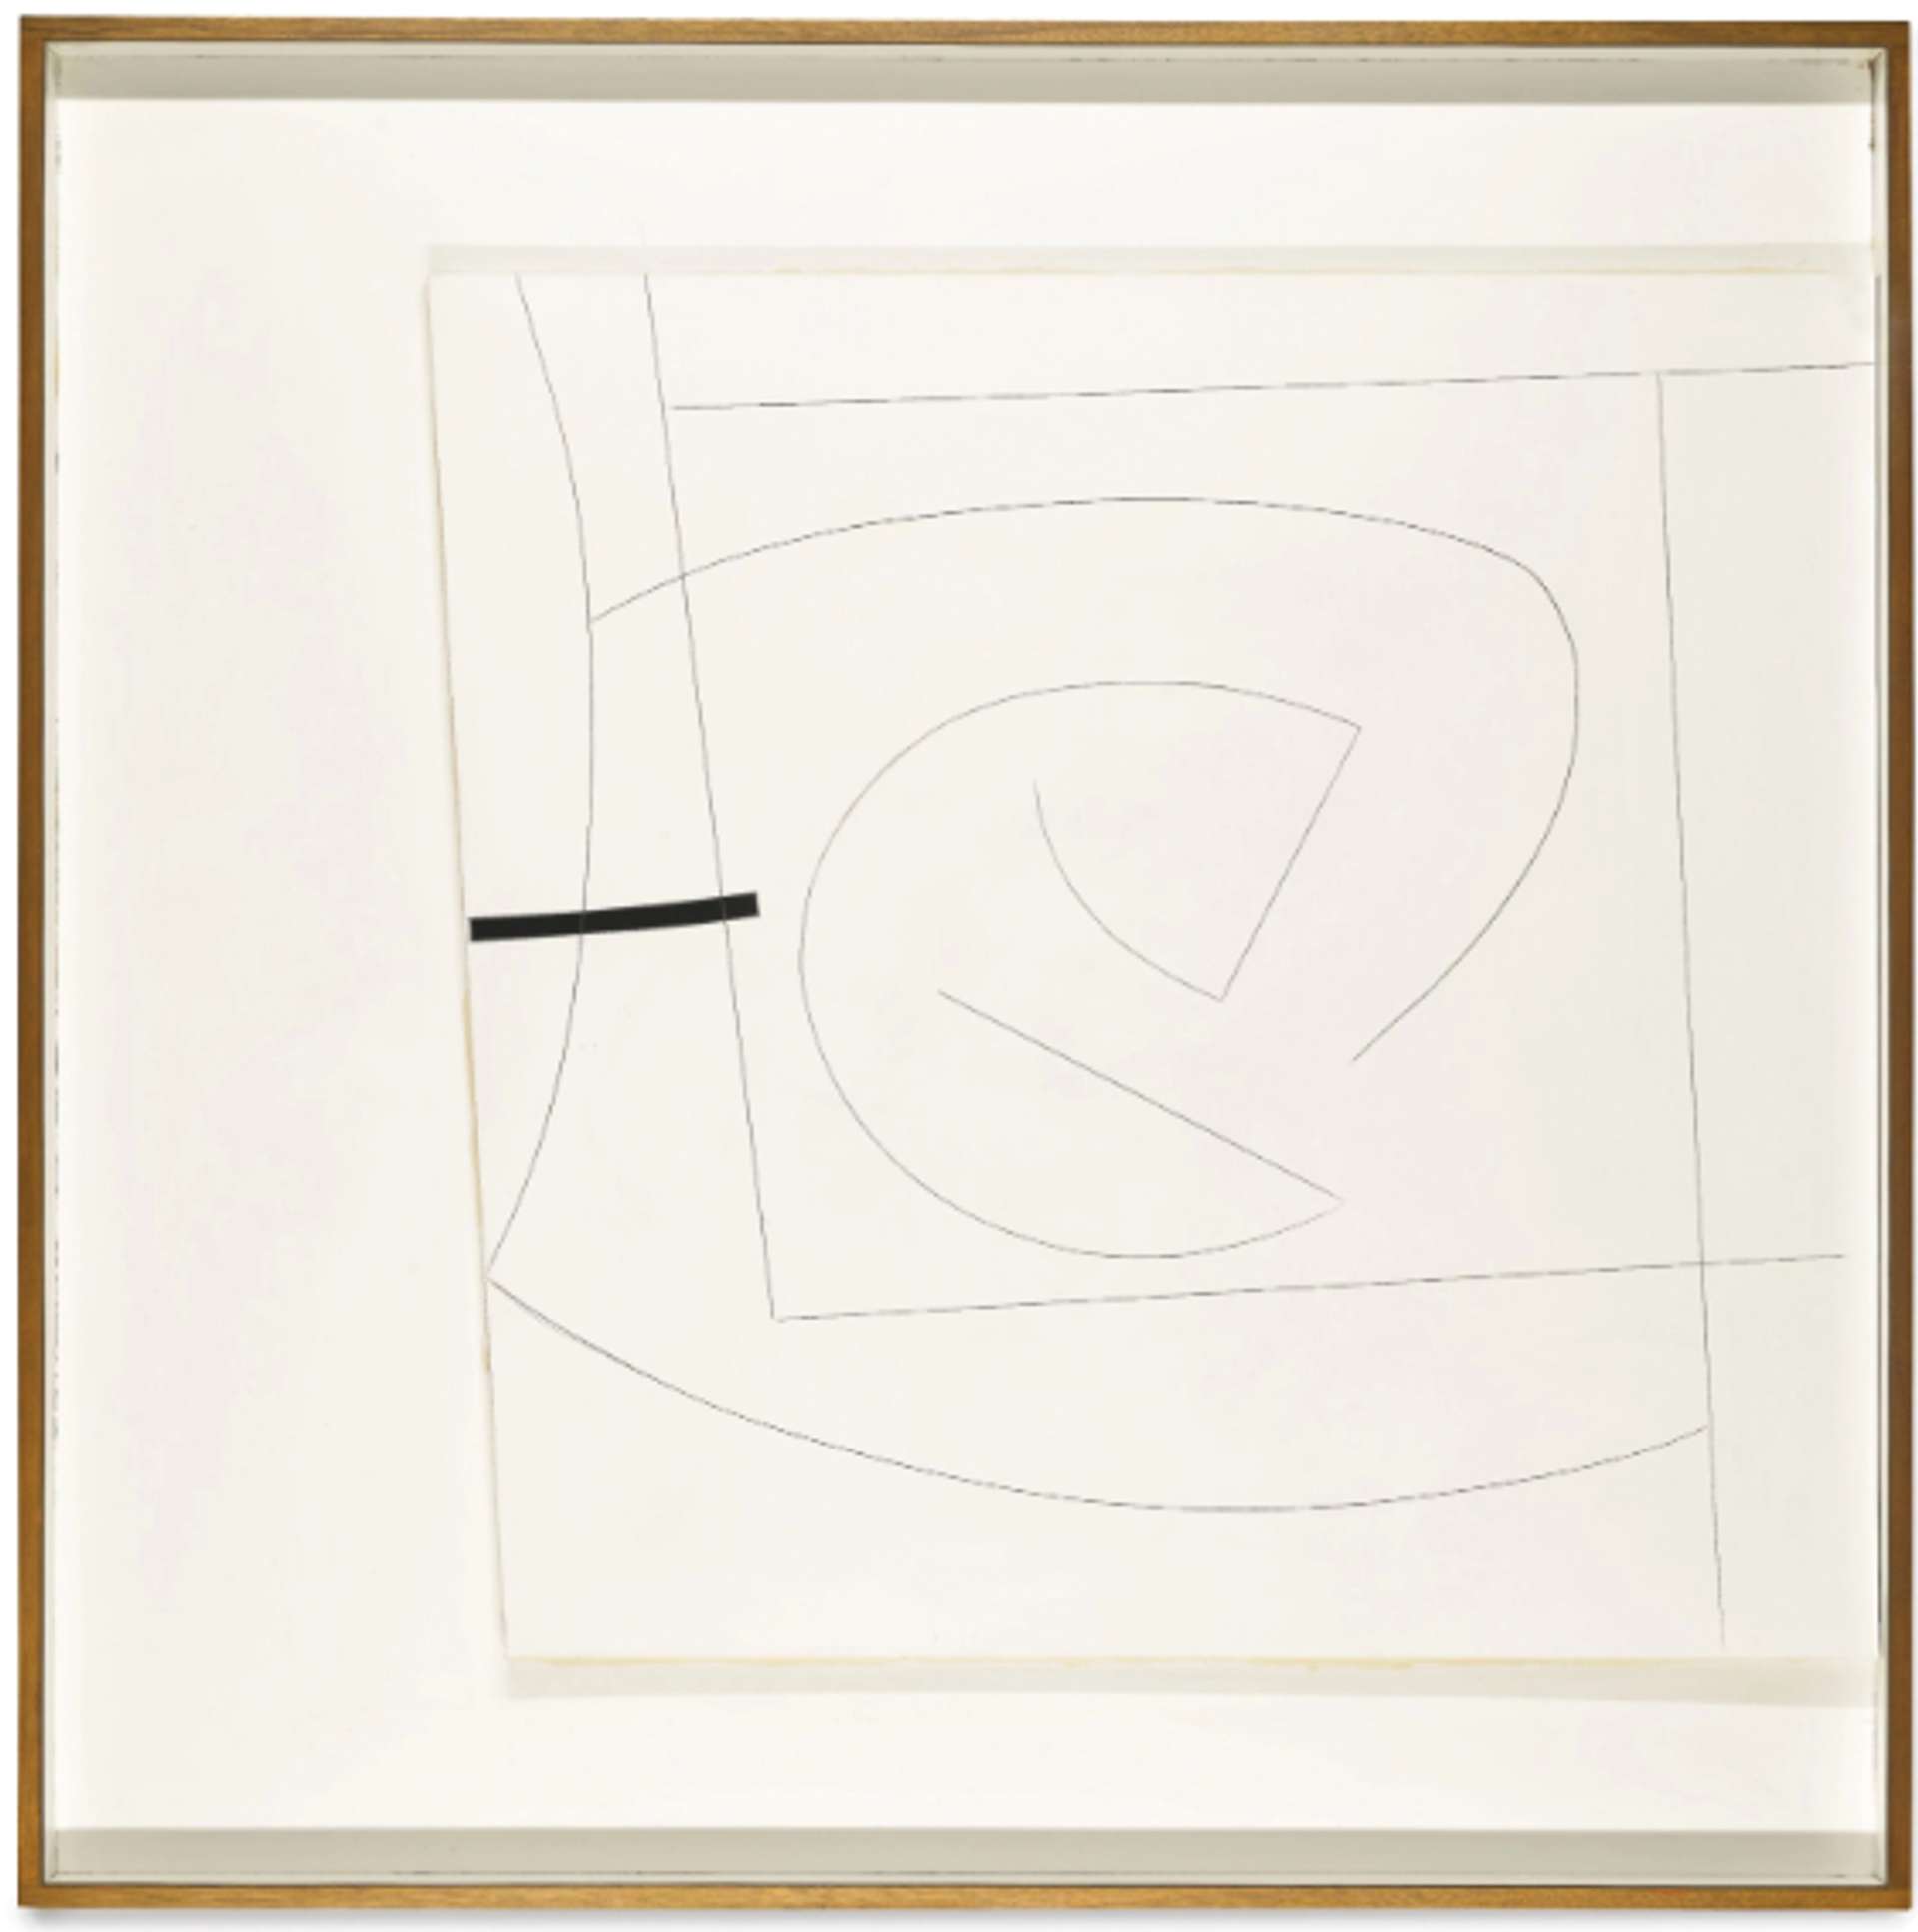 A white square composition is overlaid with another white square, which is adorned with delicate black lines forming abstract geometric shapes. Cutting through a quarter of the square from the right-hand side, a thicker black line adds an intersecting element. The artwork is elegantly framed by a slim brown wooden frame.